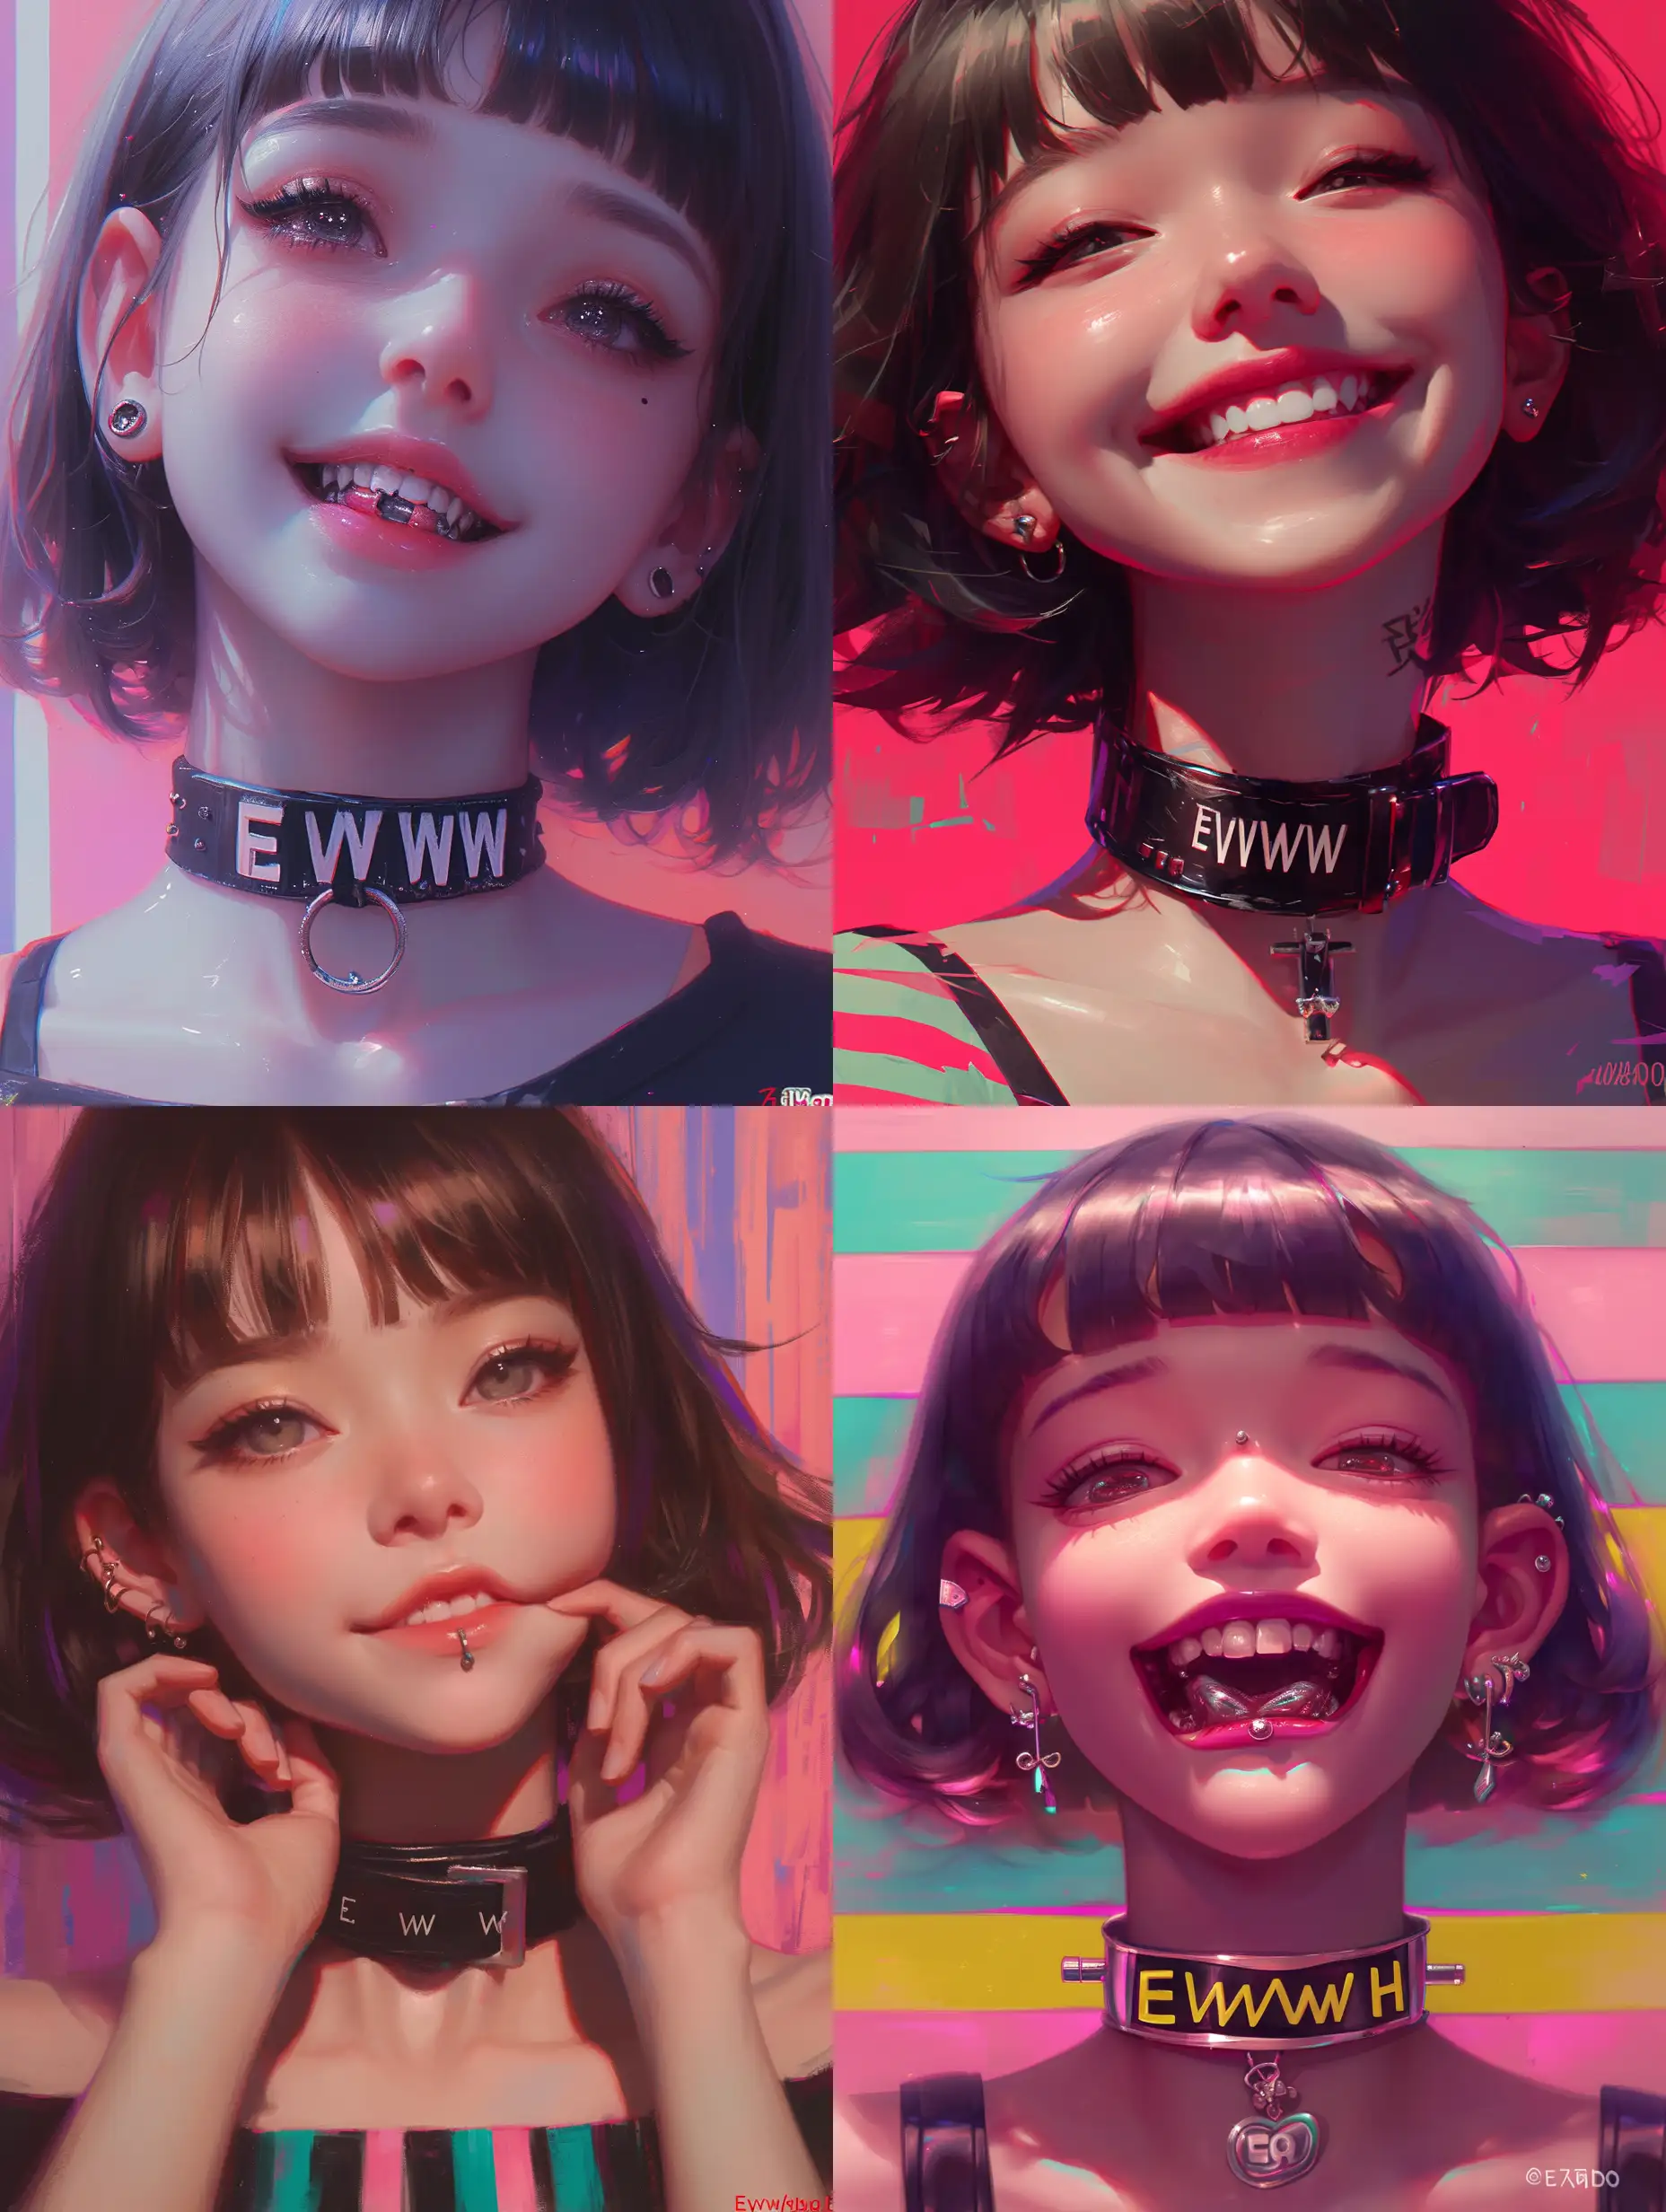 Detailed-Realistic-Portrait-of-Girl-with-Piercing-Collar-and-Dramatic-Smile